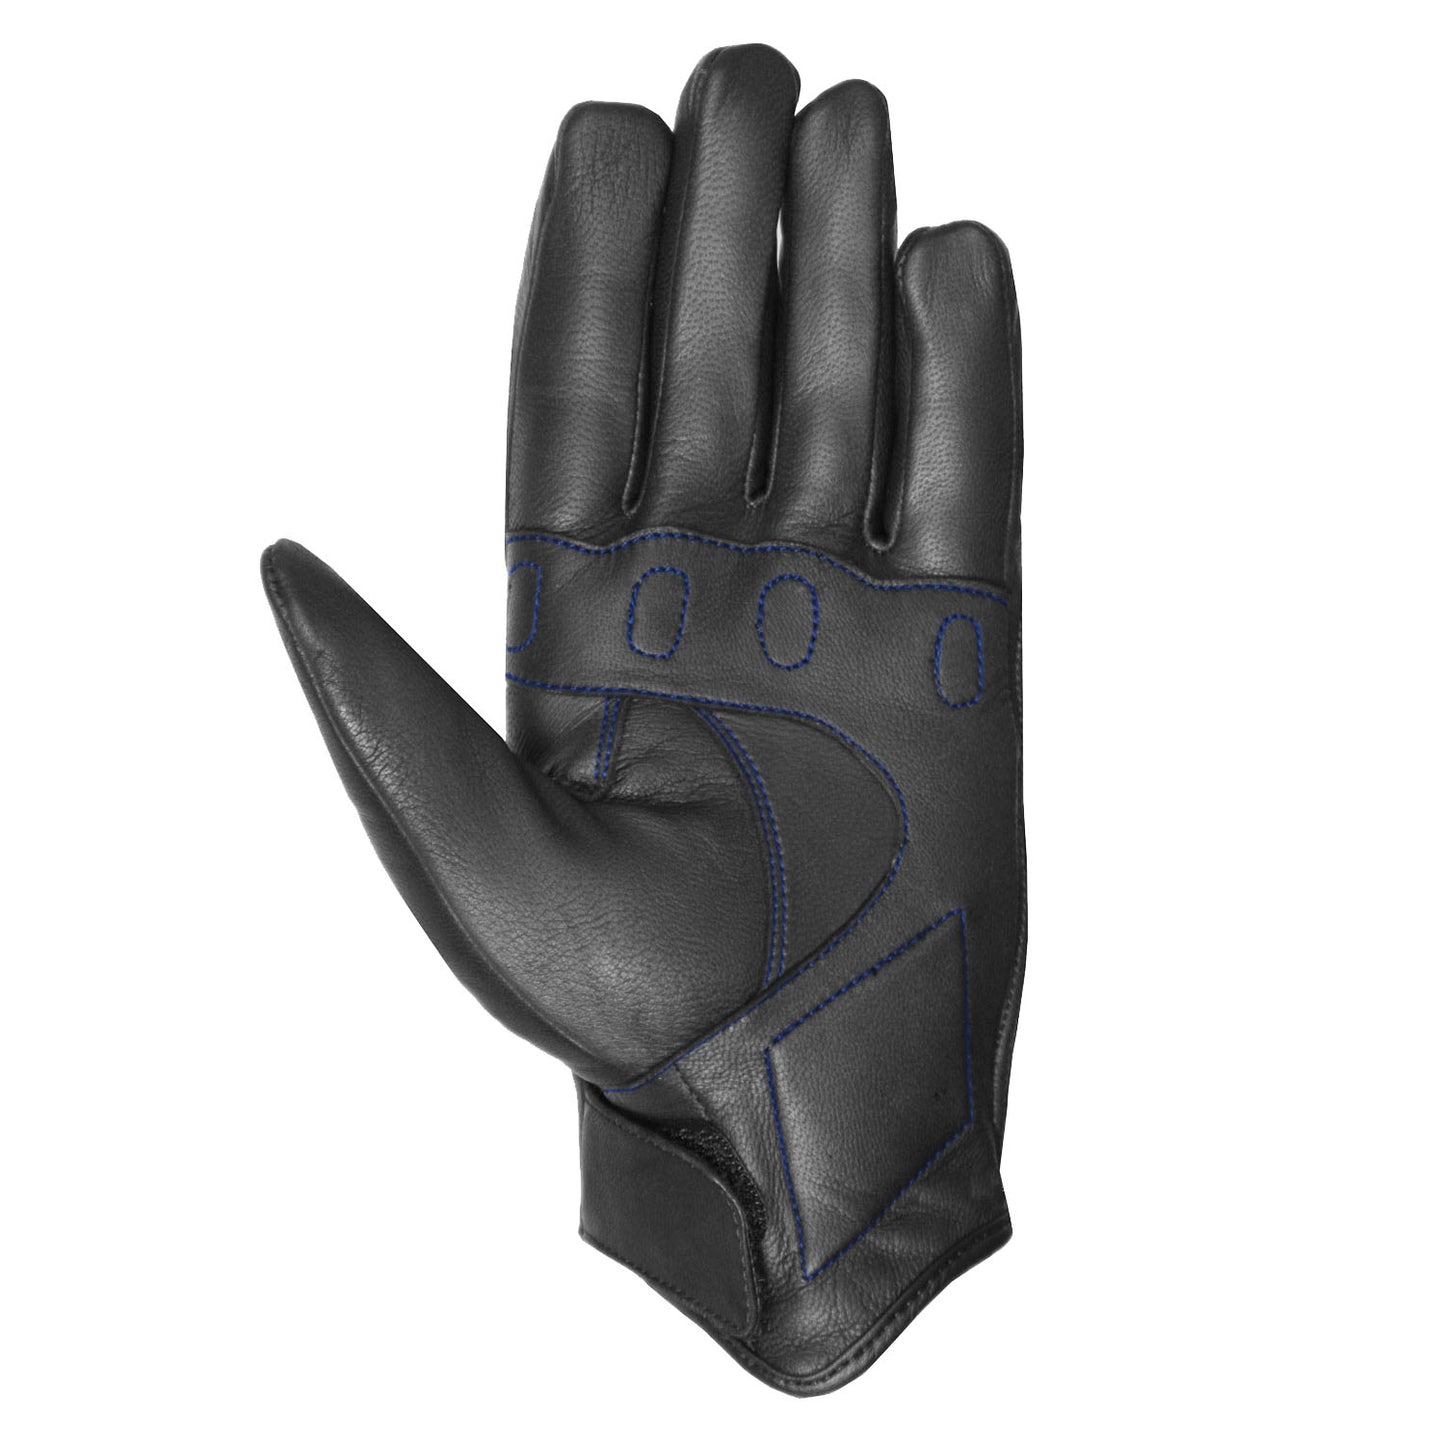 Motorcycle Bicycle Riding Racing Bike Protective Armor Gel Leather Gloves BlackBlue